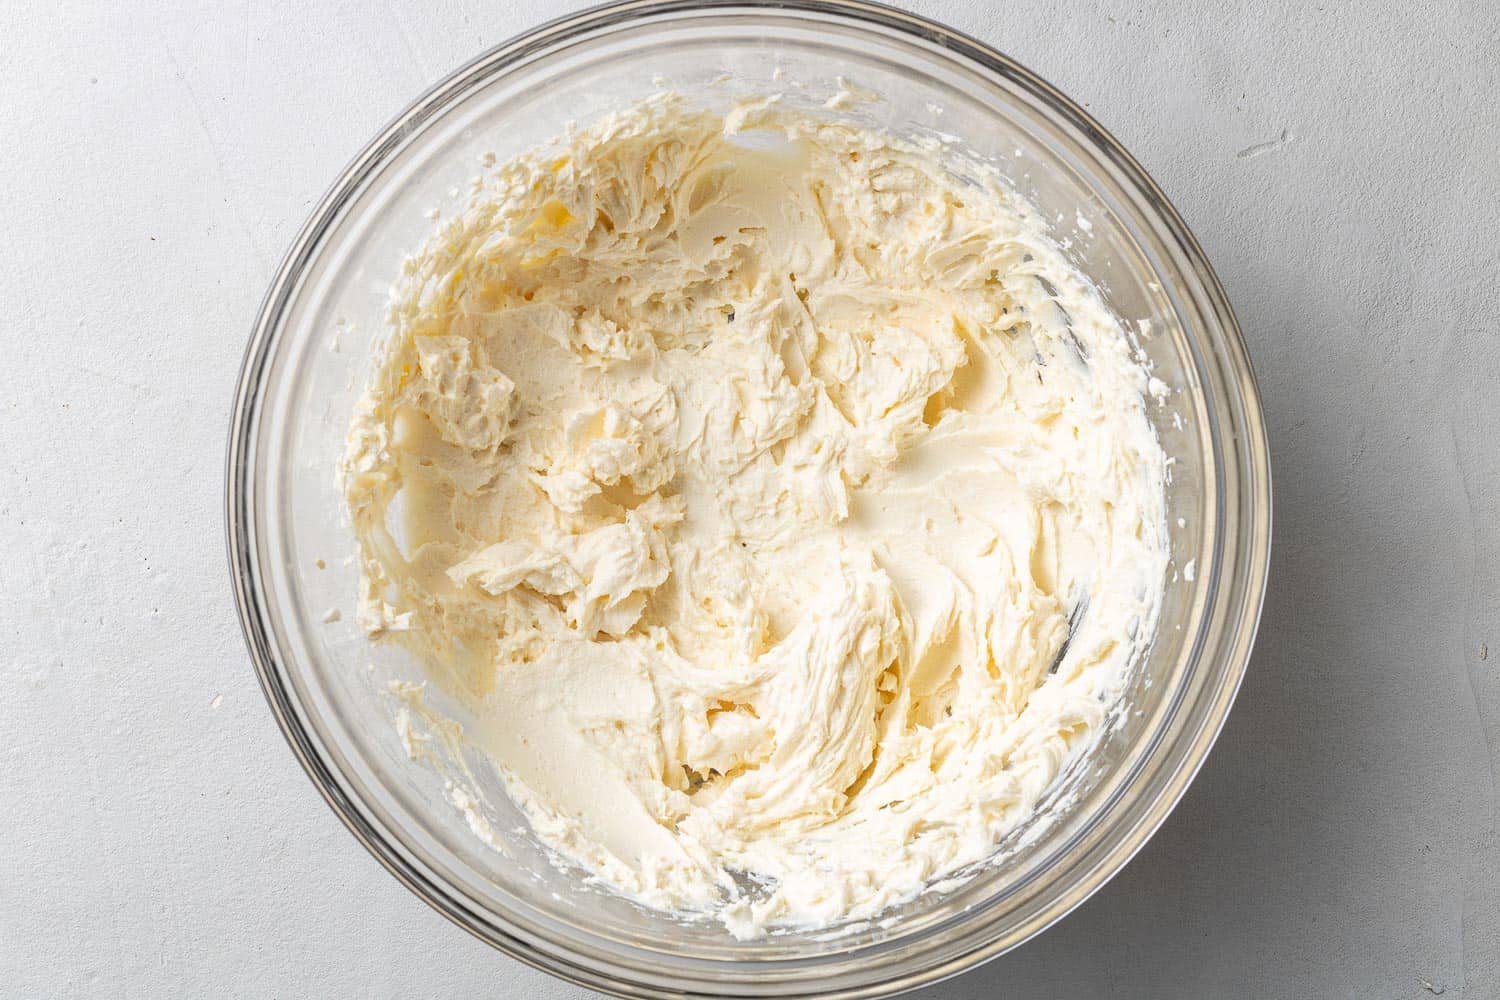 Butter and cream cheese creamed together in a glass mixing bowl.